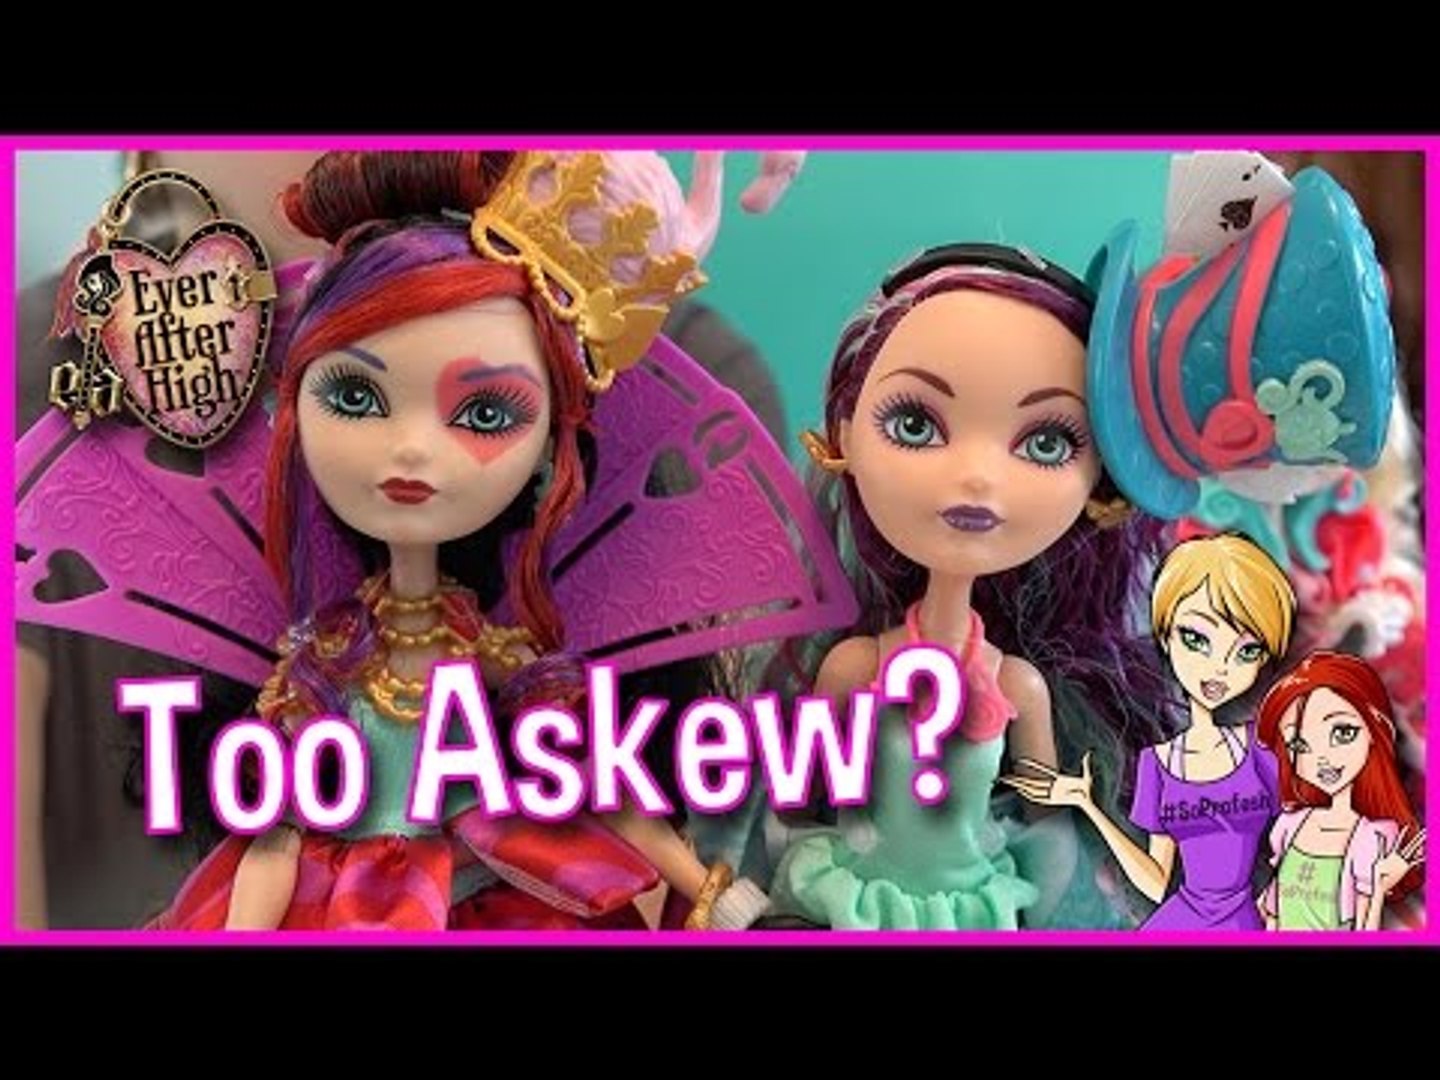 Dolly Review: Ever After High Alistair Wonderland